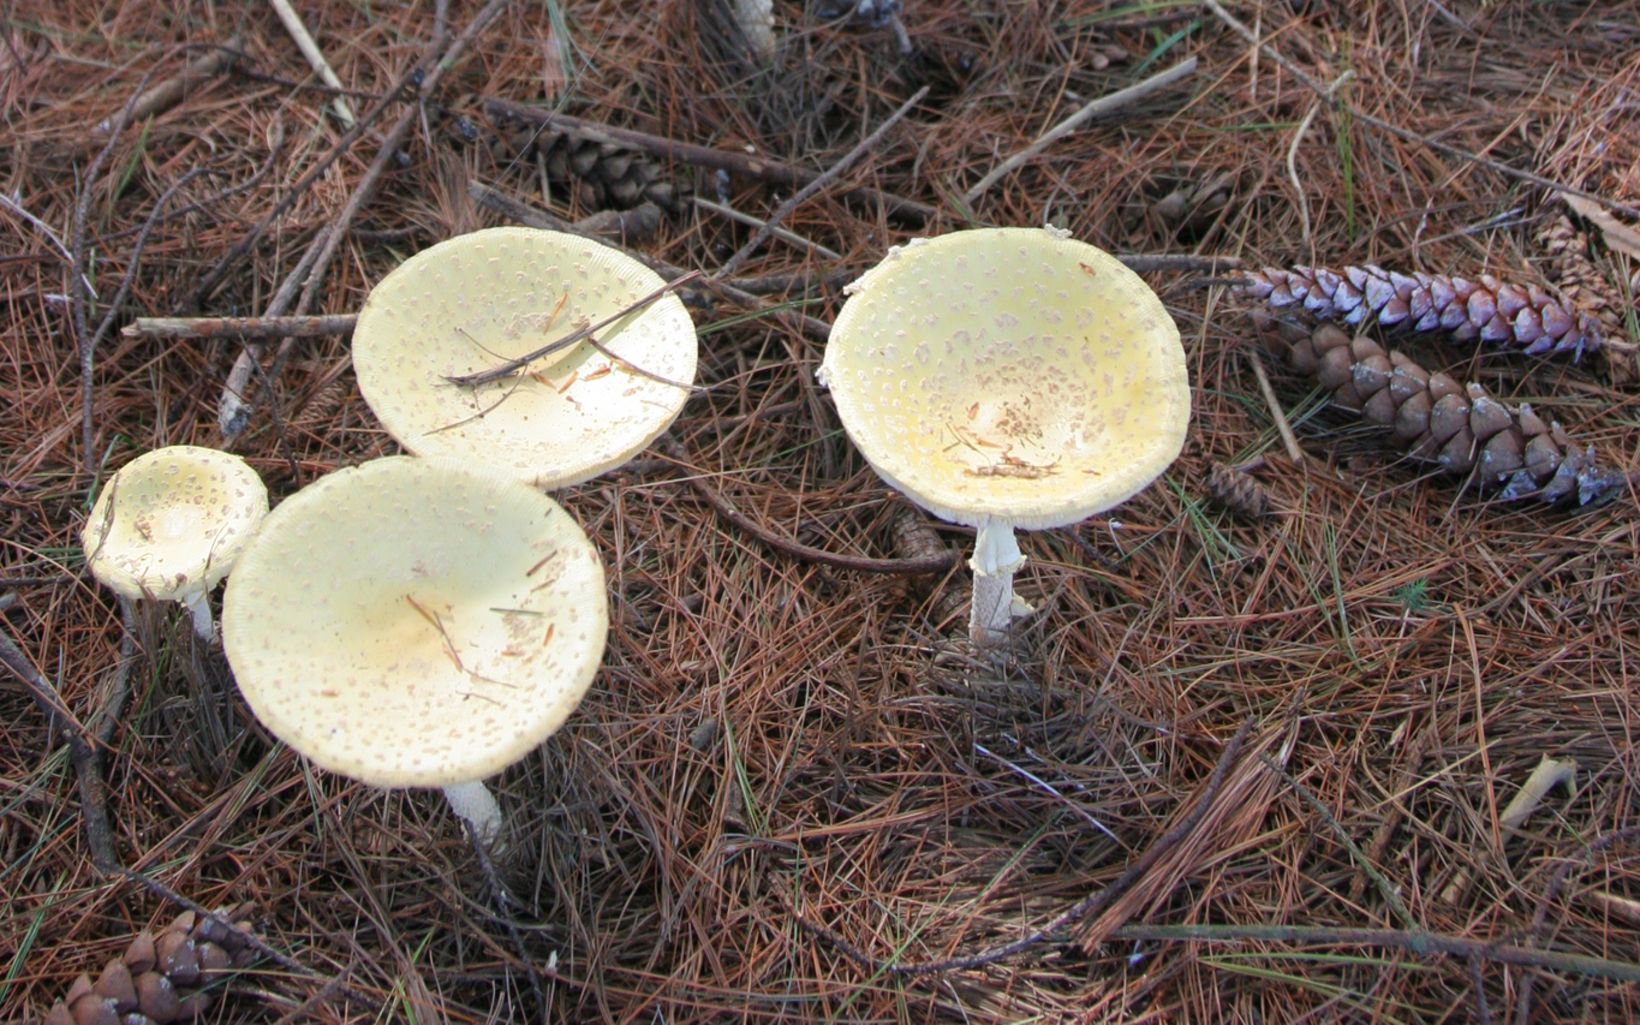 Mushrooms are growing on a forest floor.